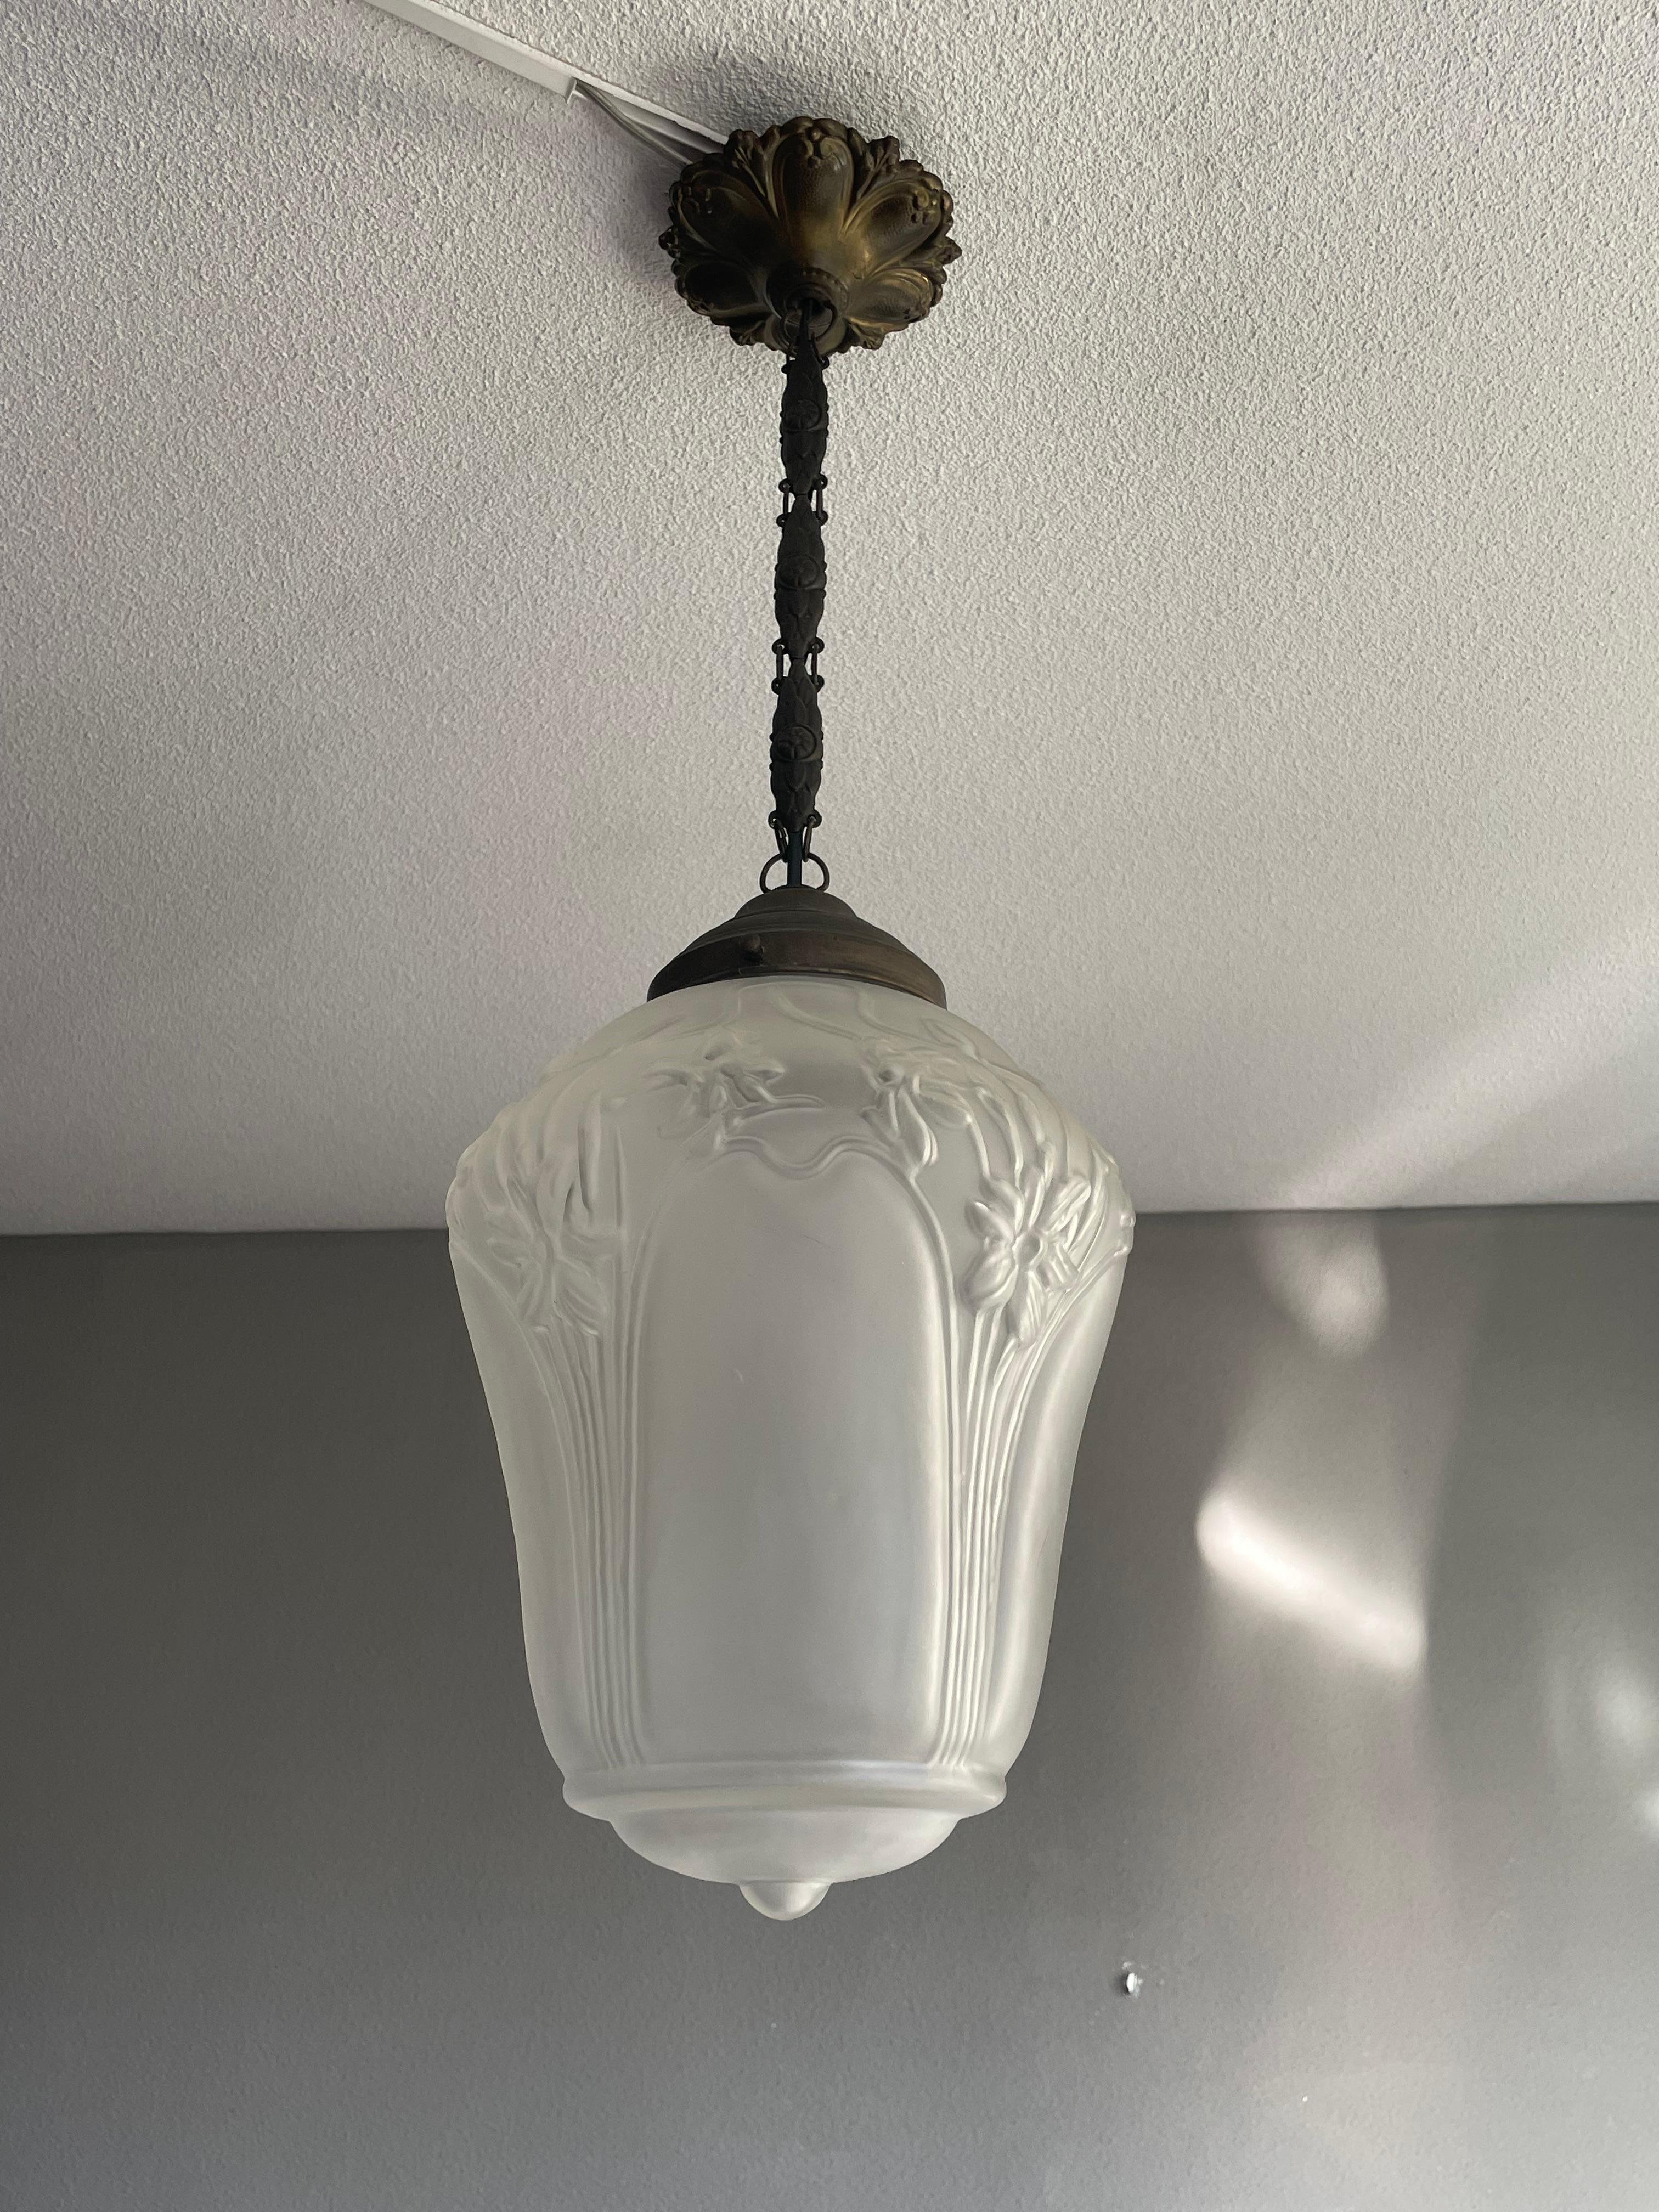 Original Arts and Crafts Glass Hallway Pendant Light with Daffodil Flowers 1900s For Sale 11